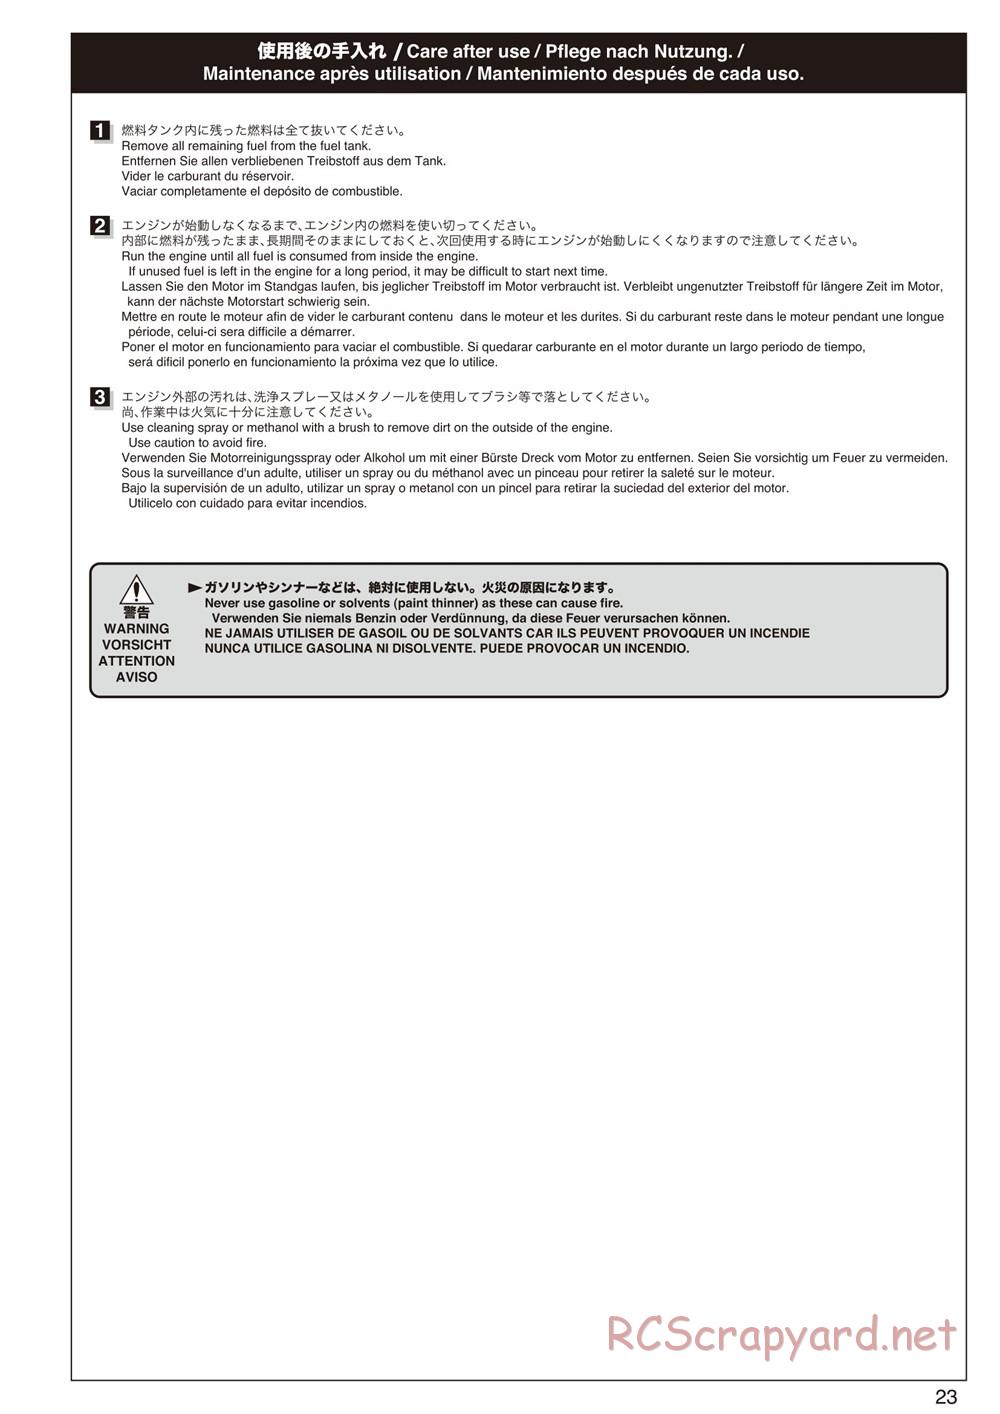 Kyosho - Mad Force Kruiser 2.0 - Manual - Page 23